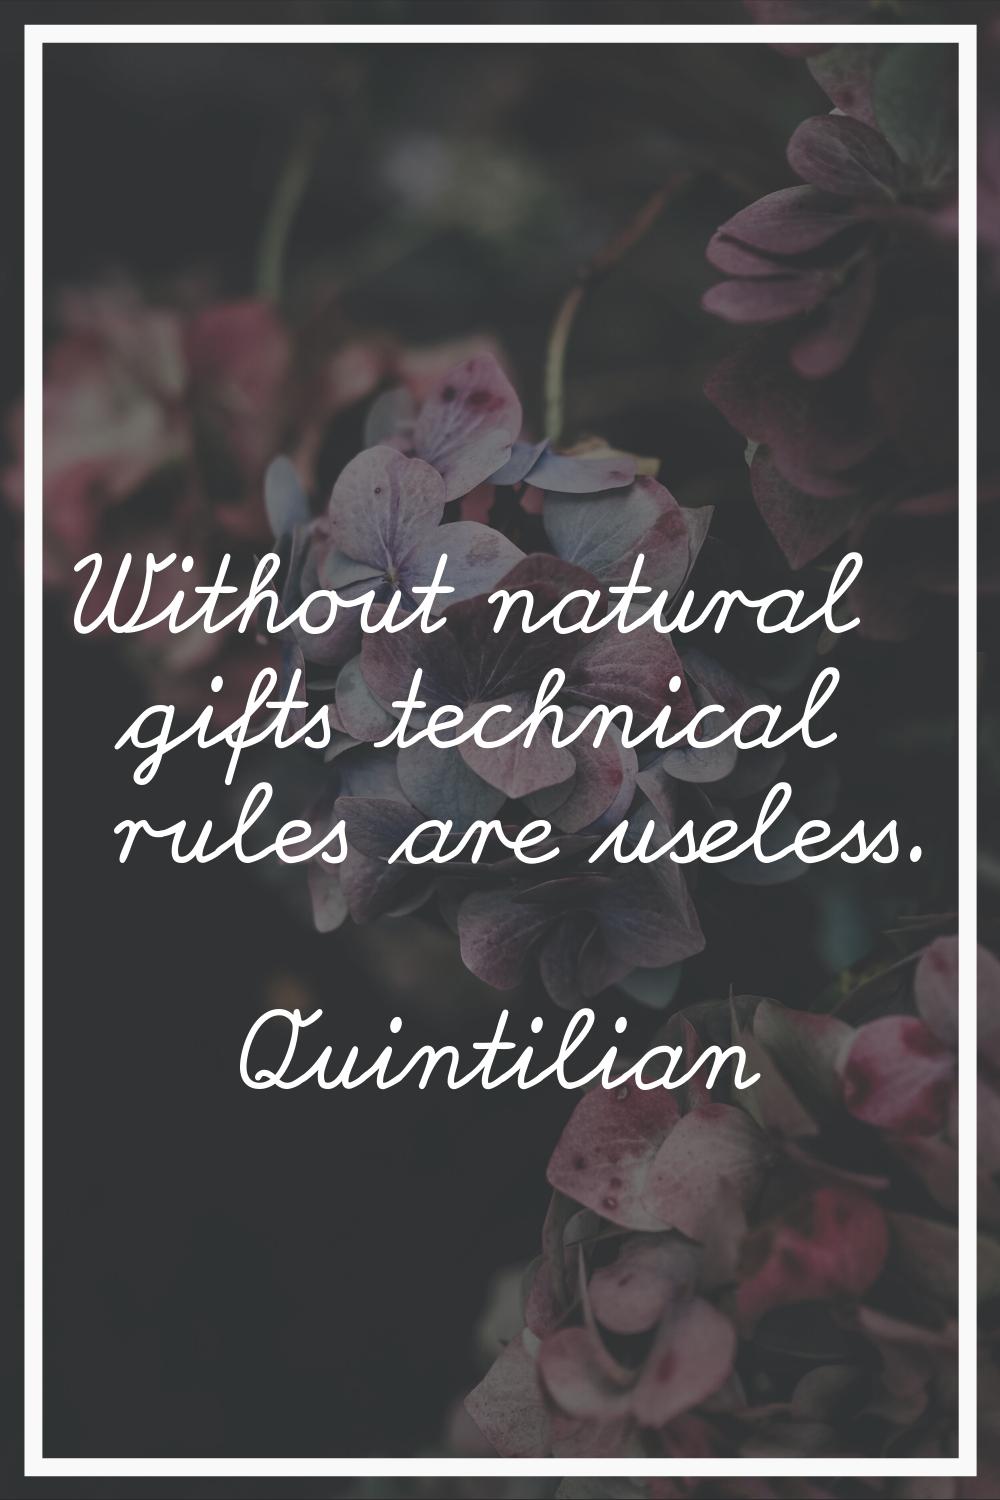 Without natural gifts technical rules are useless.